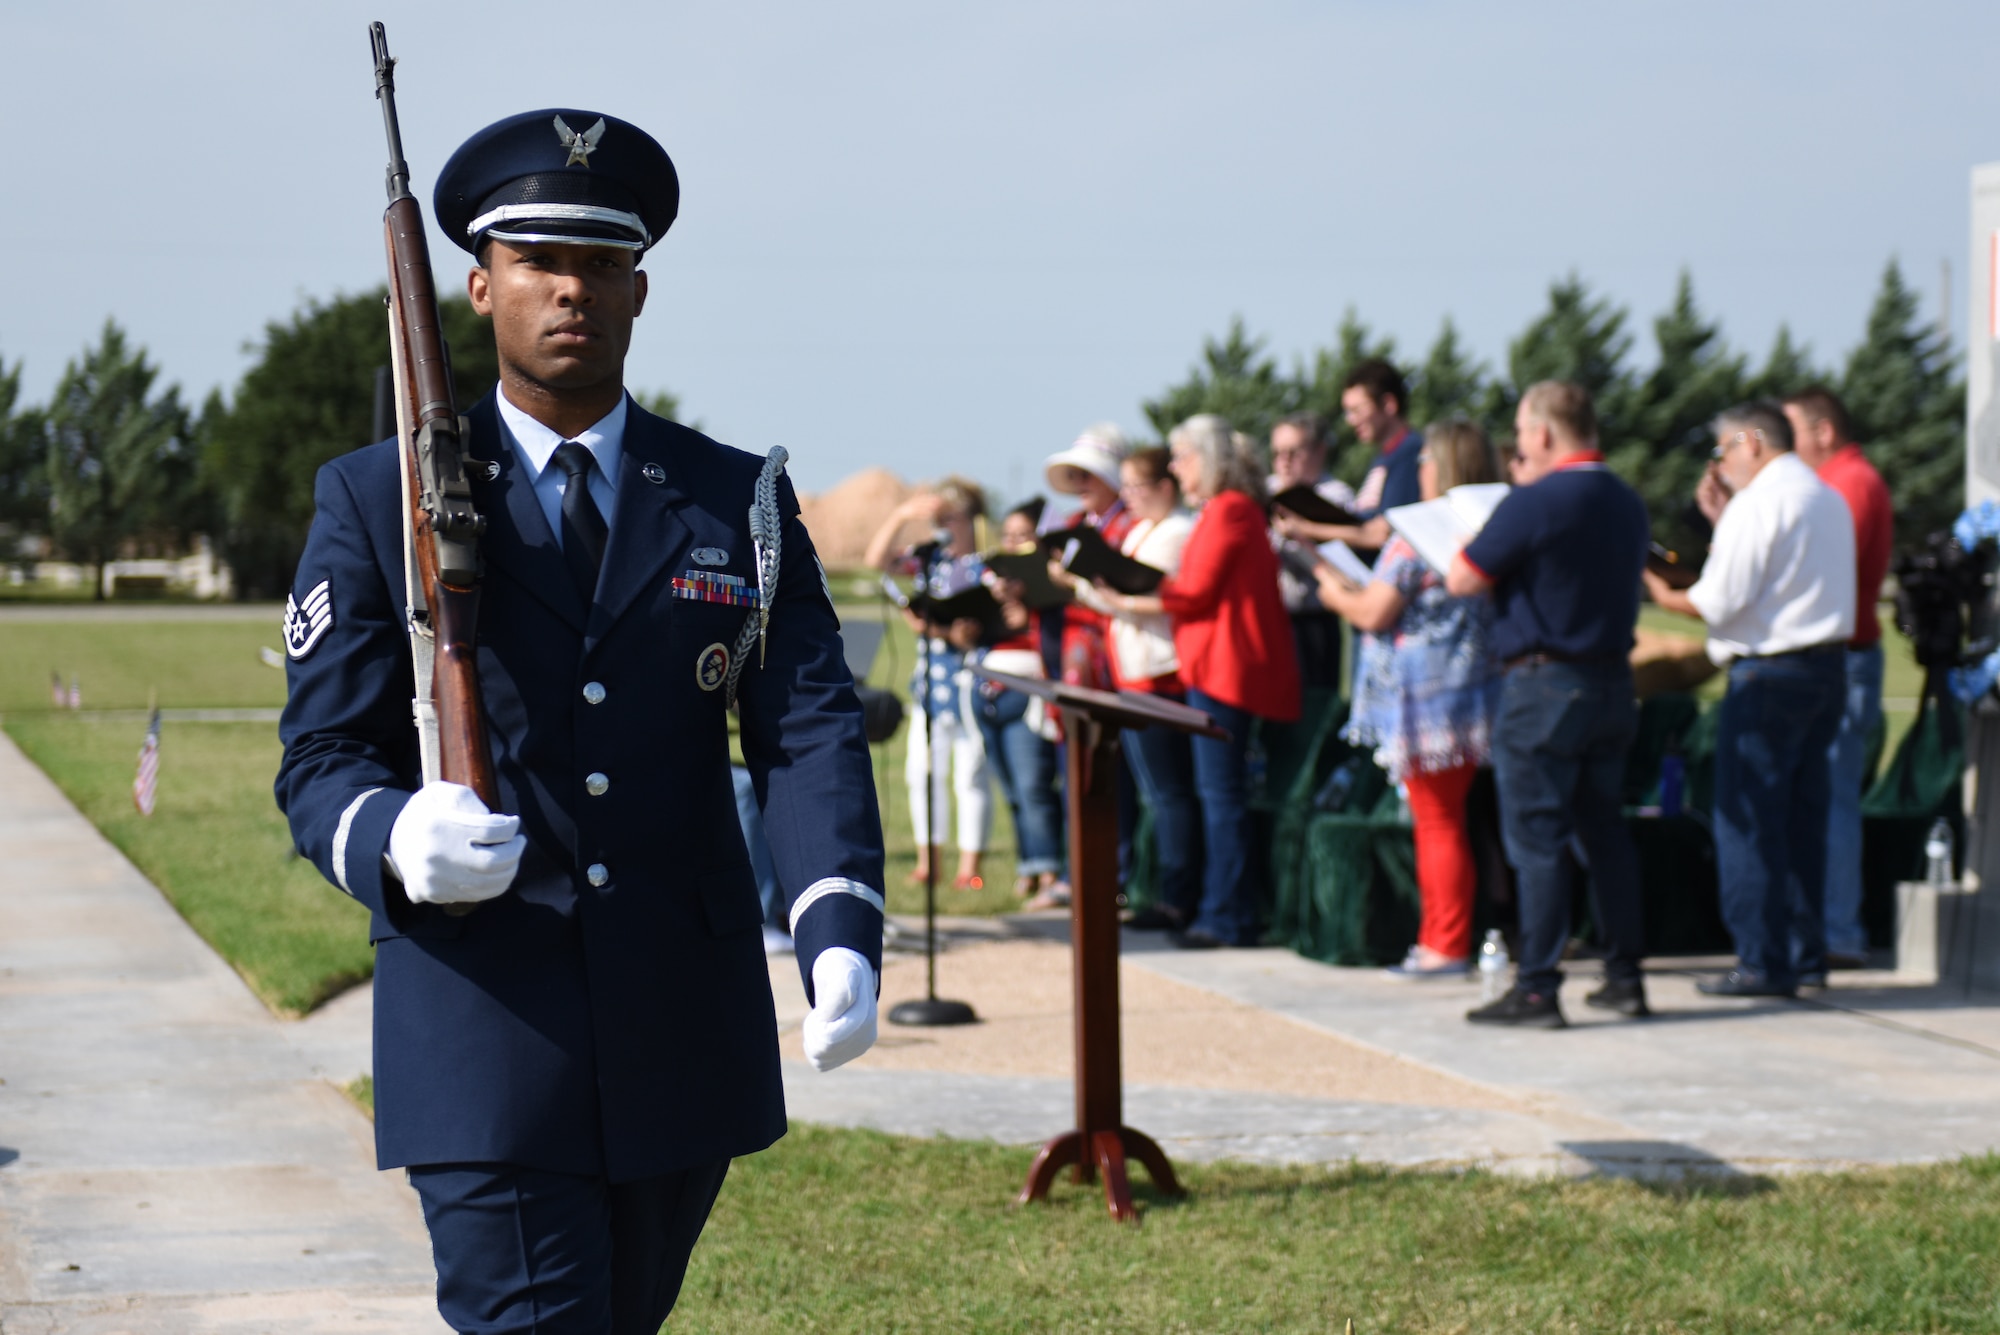 U.S. Air Force Staff Sgt. Nigel Jaggard, Goodfellow Air Force Base Honor Guard member, marches during his shift of a 24 hour watch held at Lawnhaven Memorial Gardens in San Angelo, Texas, May 27, 2019. This watch was held in conjunction with Lawnhaven’s eighth annual Memorial Day ceremony. (U.S. Air Force photo by Senior Airman Seraiah Hines/Released)